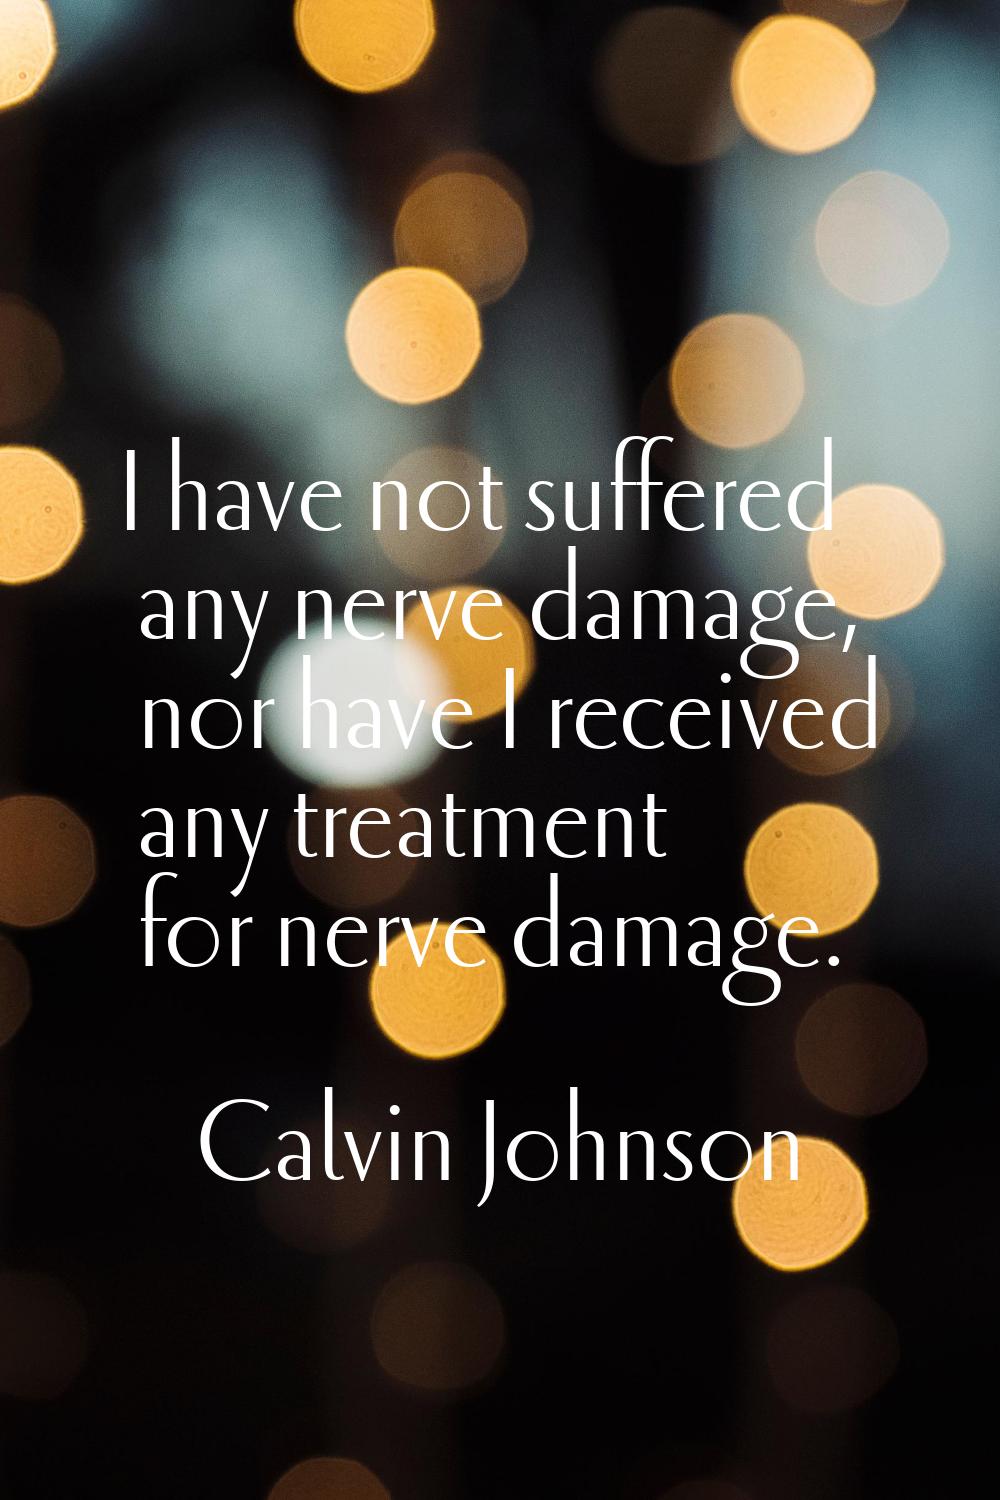 I have not suffered any nerve damage, nor have I received any treatment for nerve damage.